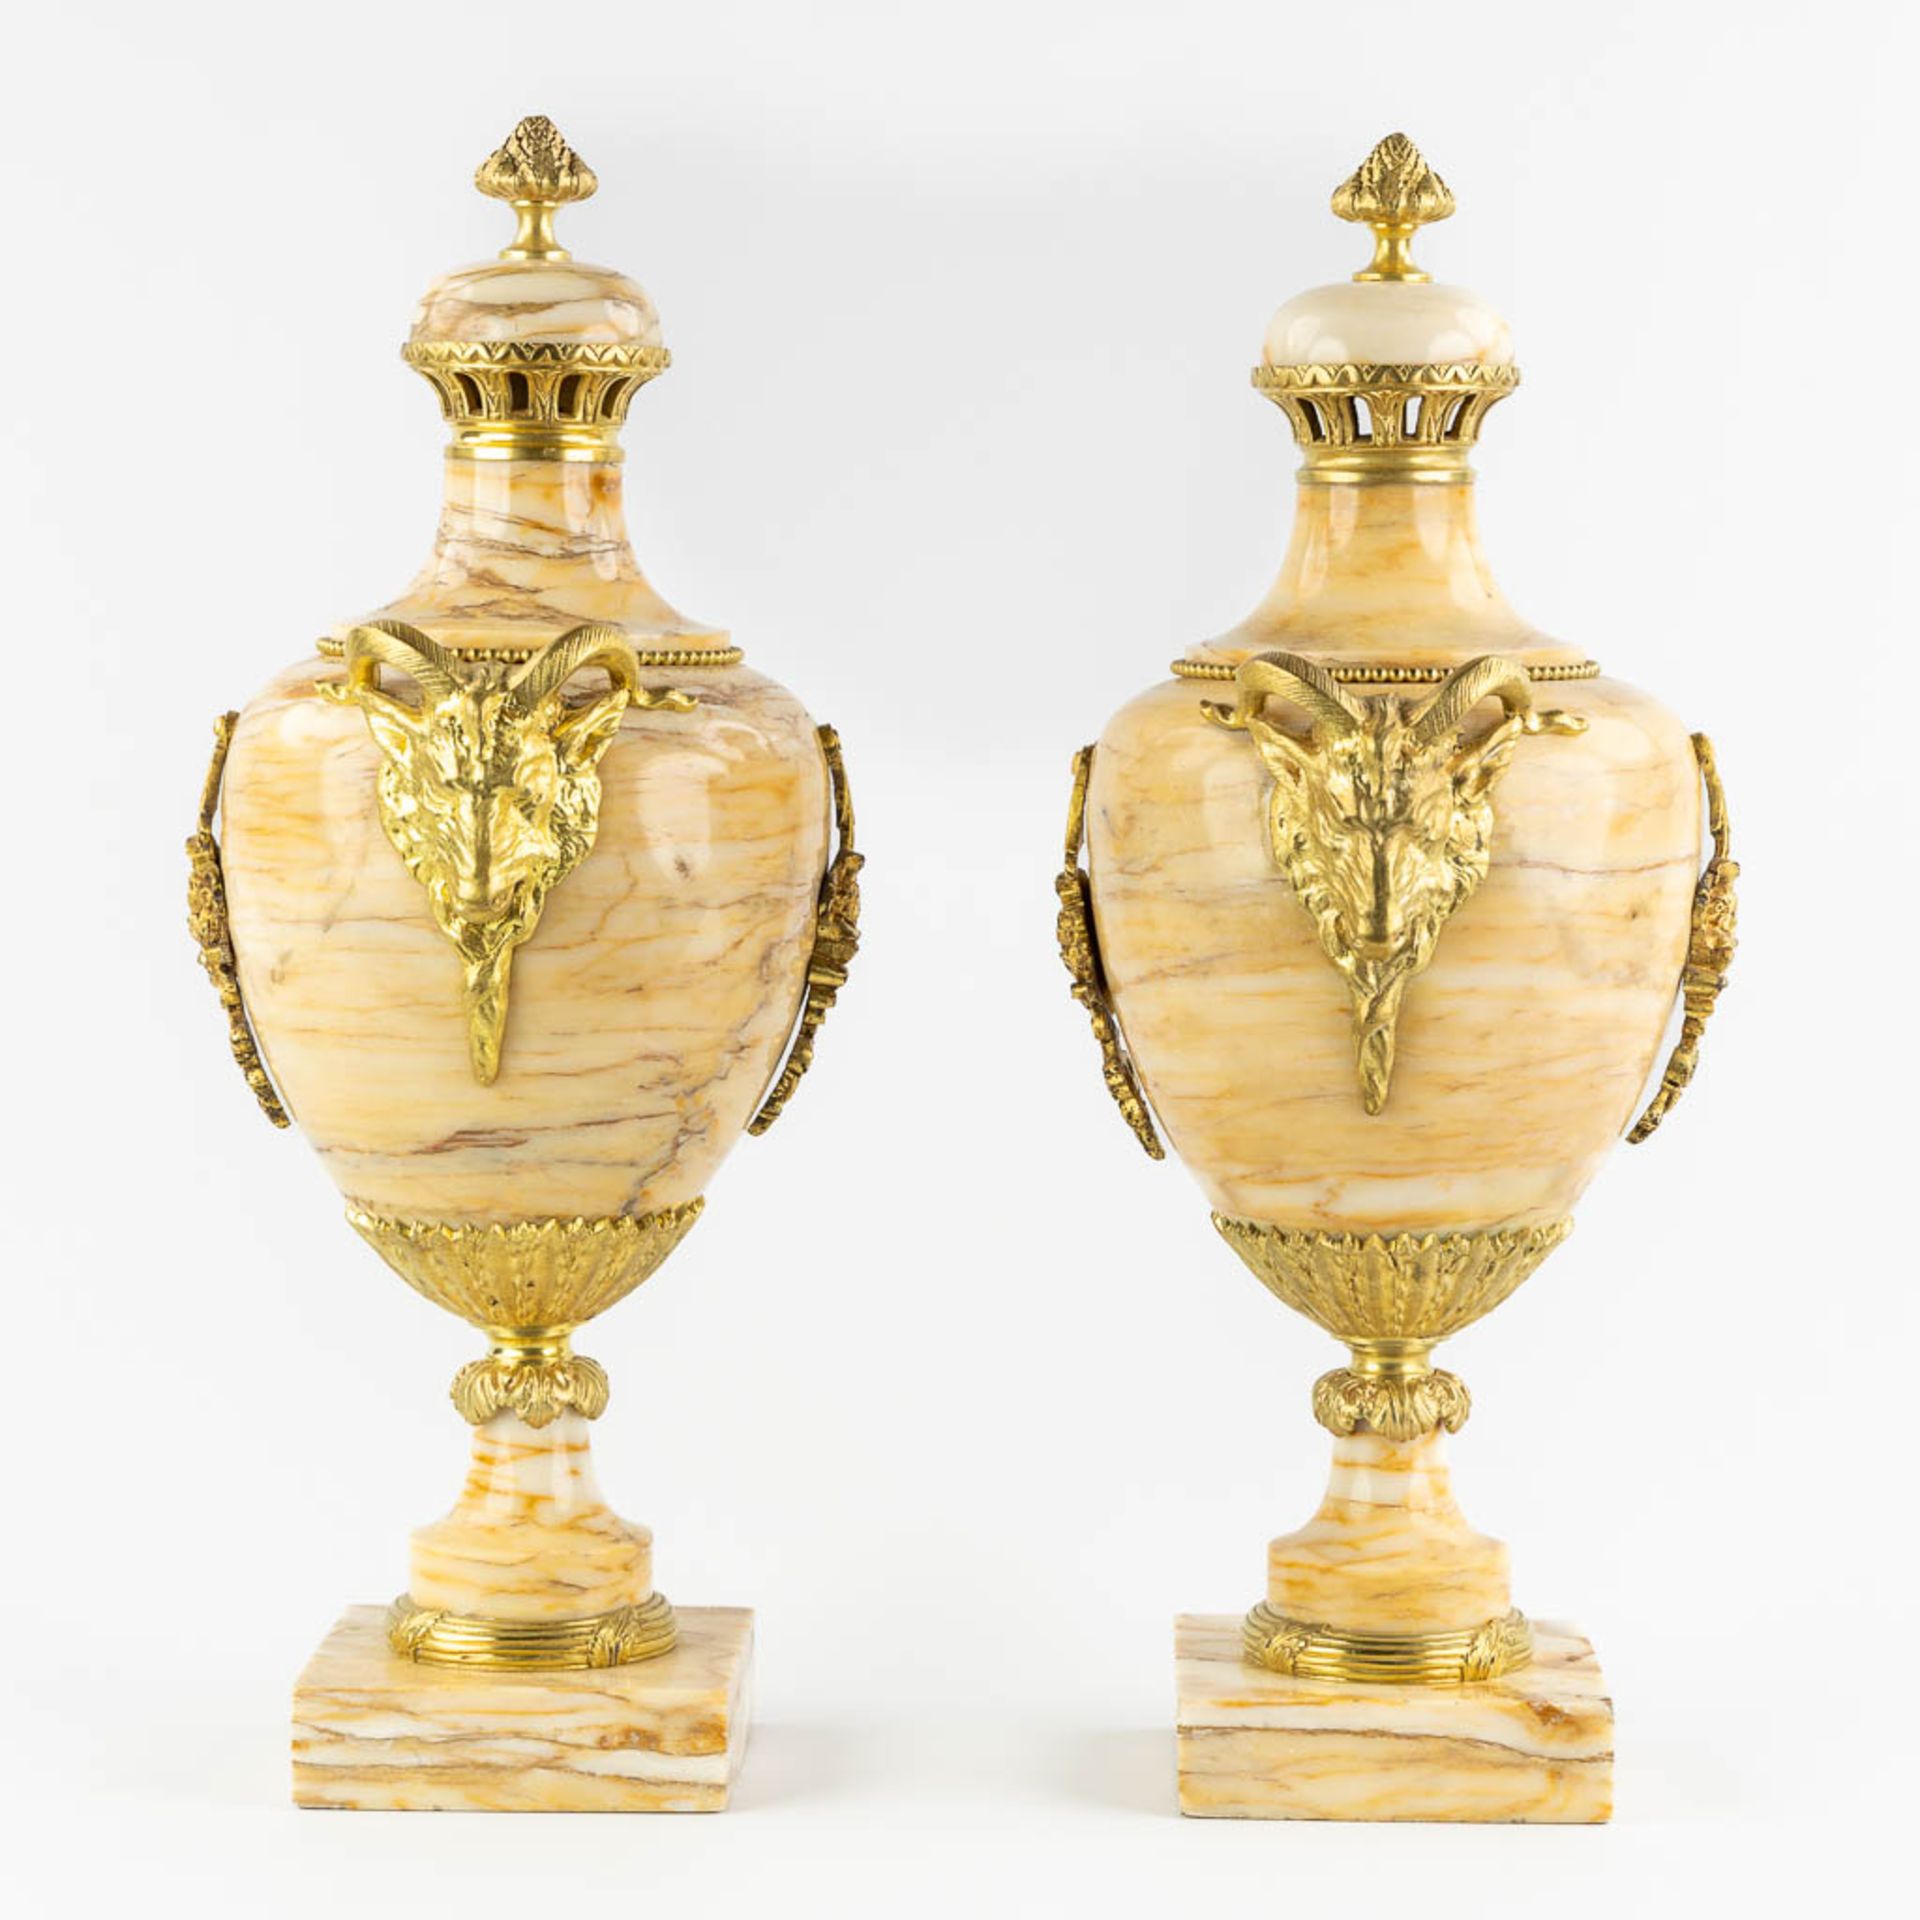 A pair of marble cassolettes, decorated with gilt bronze ram's heads. 19th C. (L:21 x W:25 x H:54 cm - Image 4 of 14